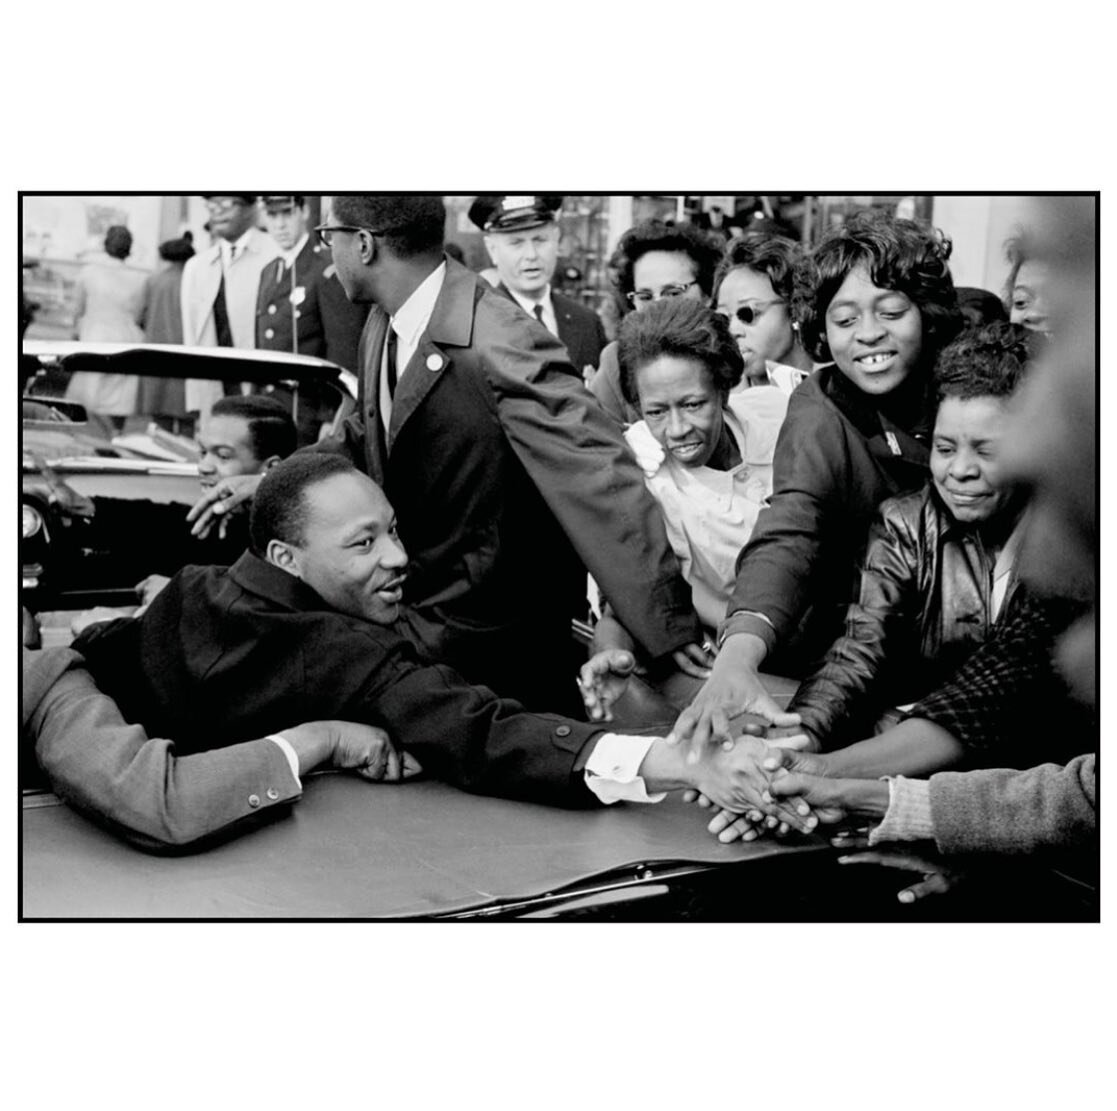 -
PHOTO: Dr. Martin Luther King, Jr. being greeted on his return to the US after receiving the Nobel Peace Prize. Baltimore, MD. USA. October 31, 1964. 
. 
&copy; @leonardfreed/#MagnumPhotos
.
.
#leonardfreed #documentary #photography #photojournalis